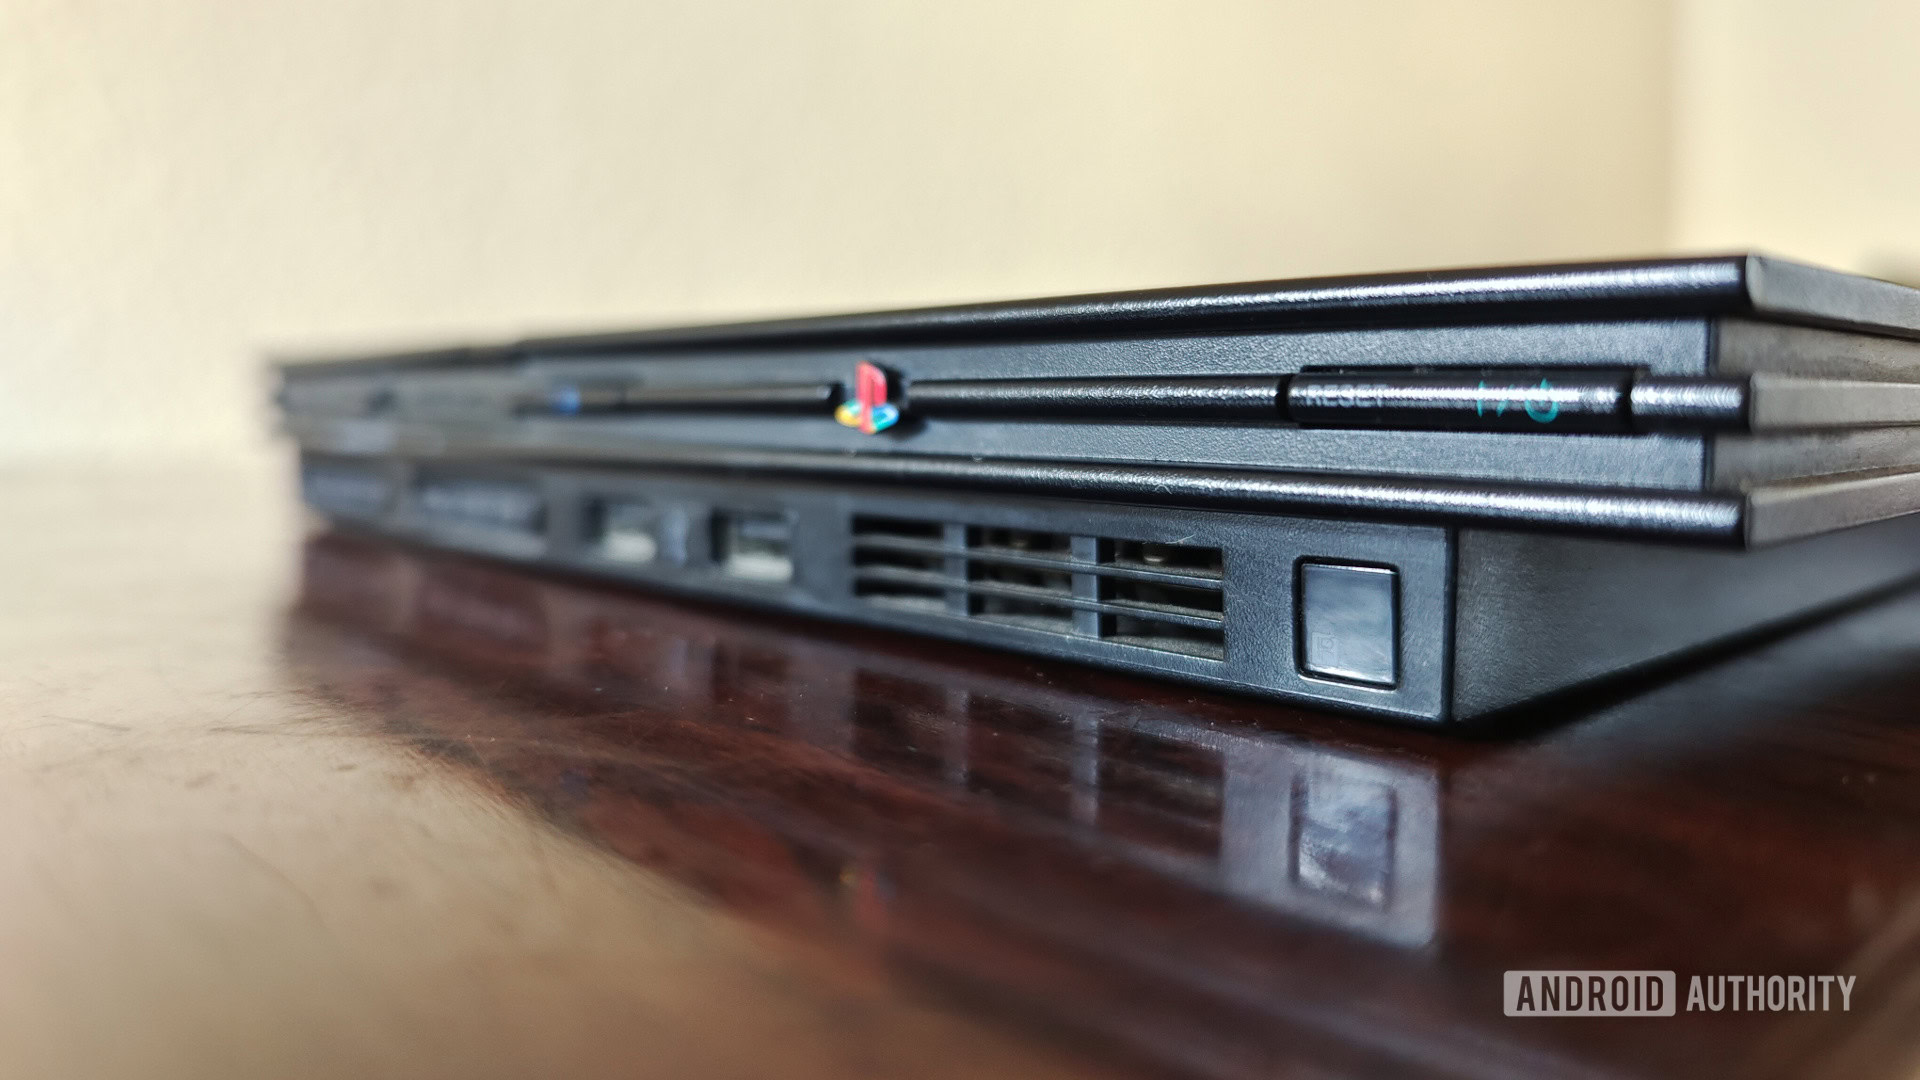 The PS2 Slim console, one of the AA team's favorite gaming consoles.